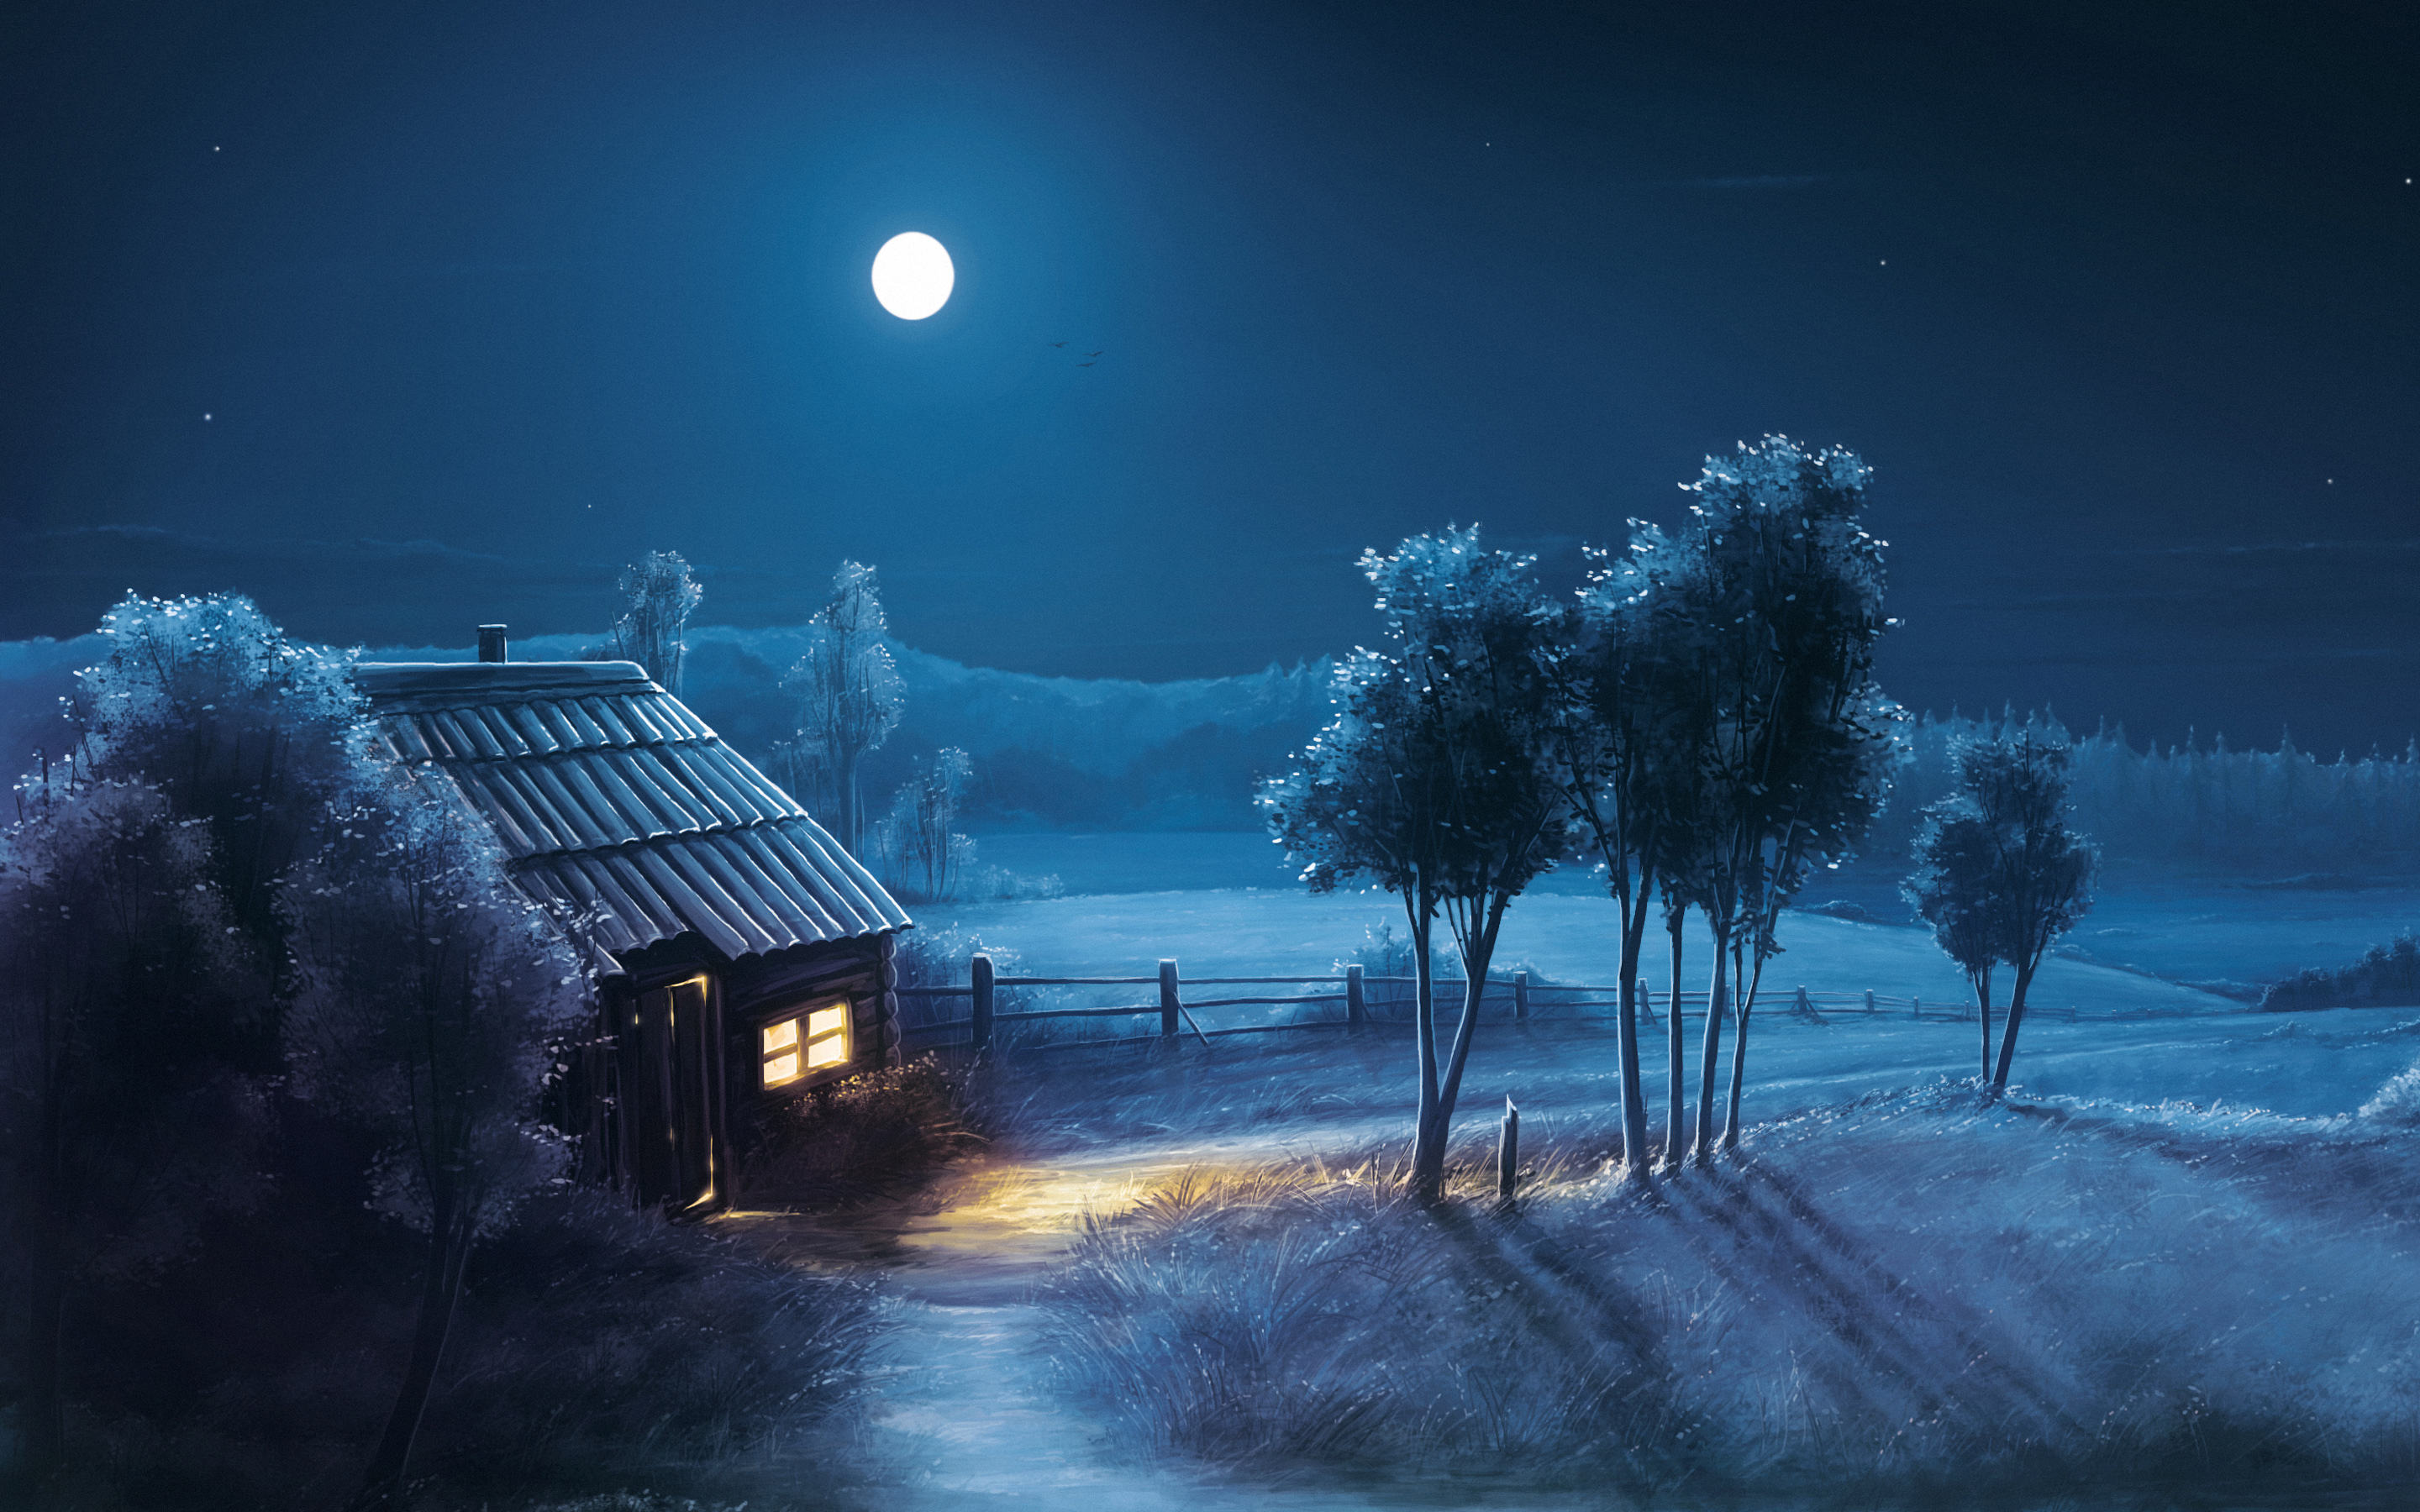 Free download Blue Night Full Scenery HD Wallpaper [2880x1800] for your Mobile & Tablet | Explore 49+ Scenery Wallpapers | Anime Scenery Wallpaper, HD Scenery Wallpaper, Natural Wallpaper